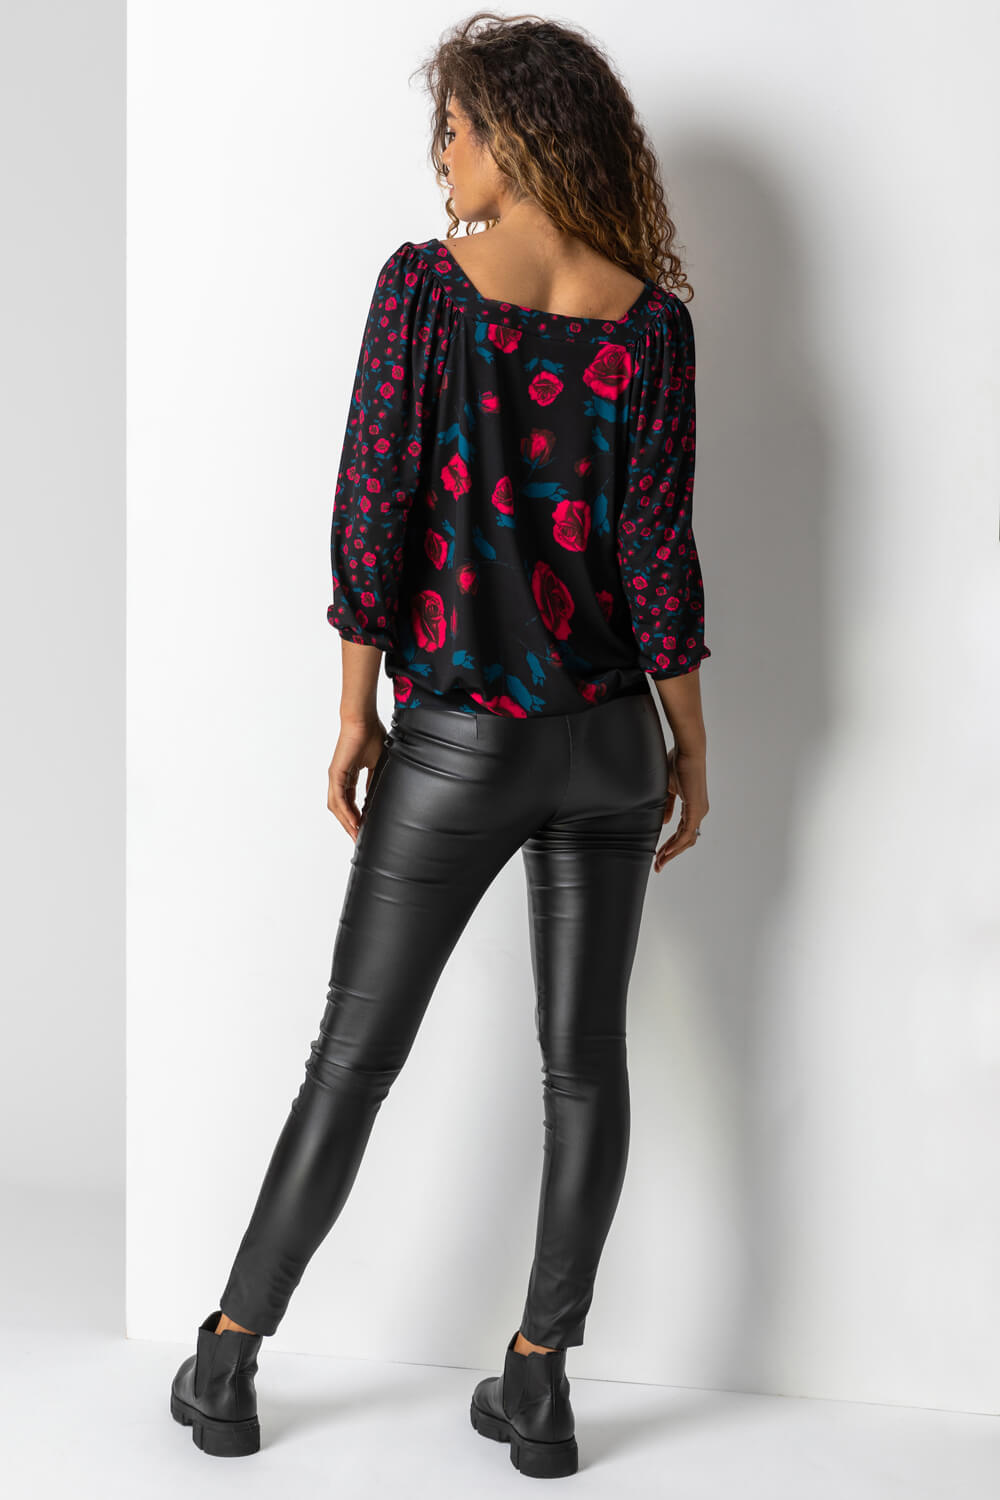 PINK Contrast Floral Print Square Neck Top, Image 2 of 5